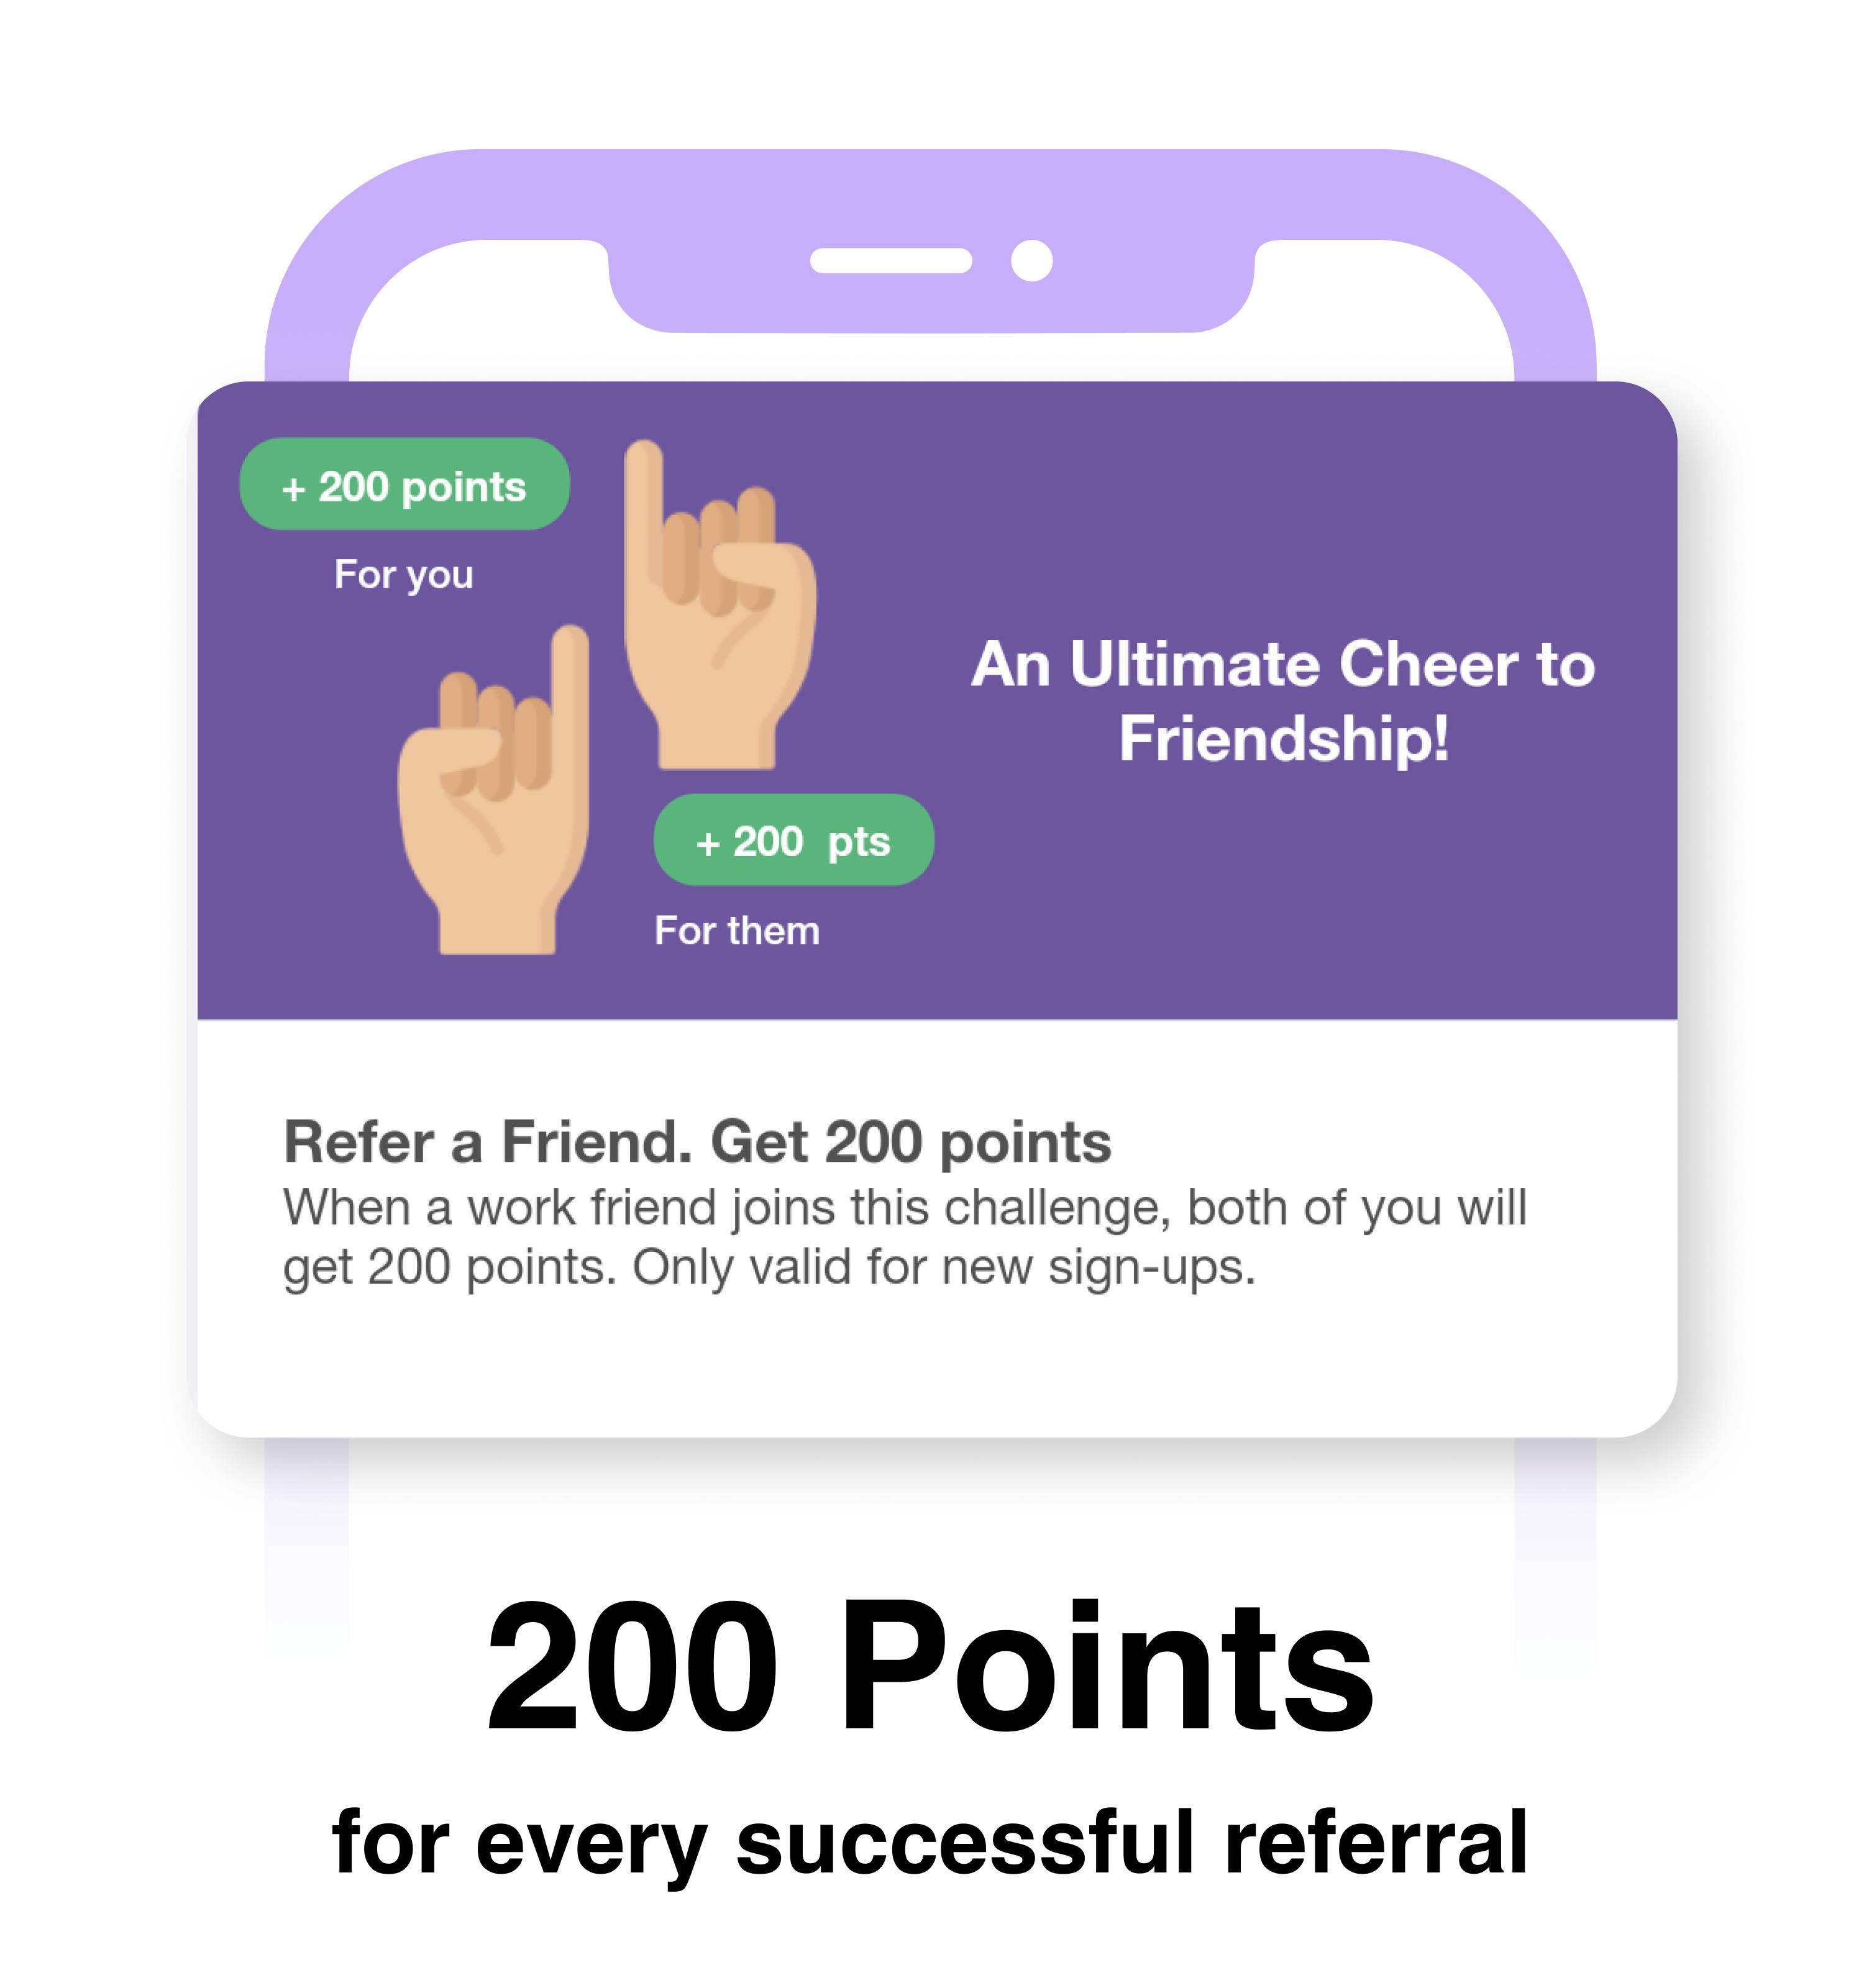 Successful Referral@2x.png